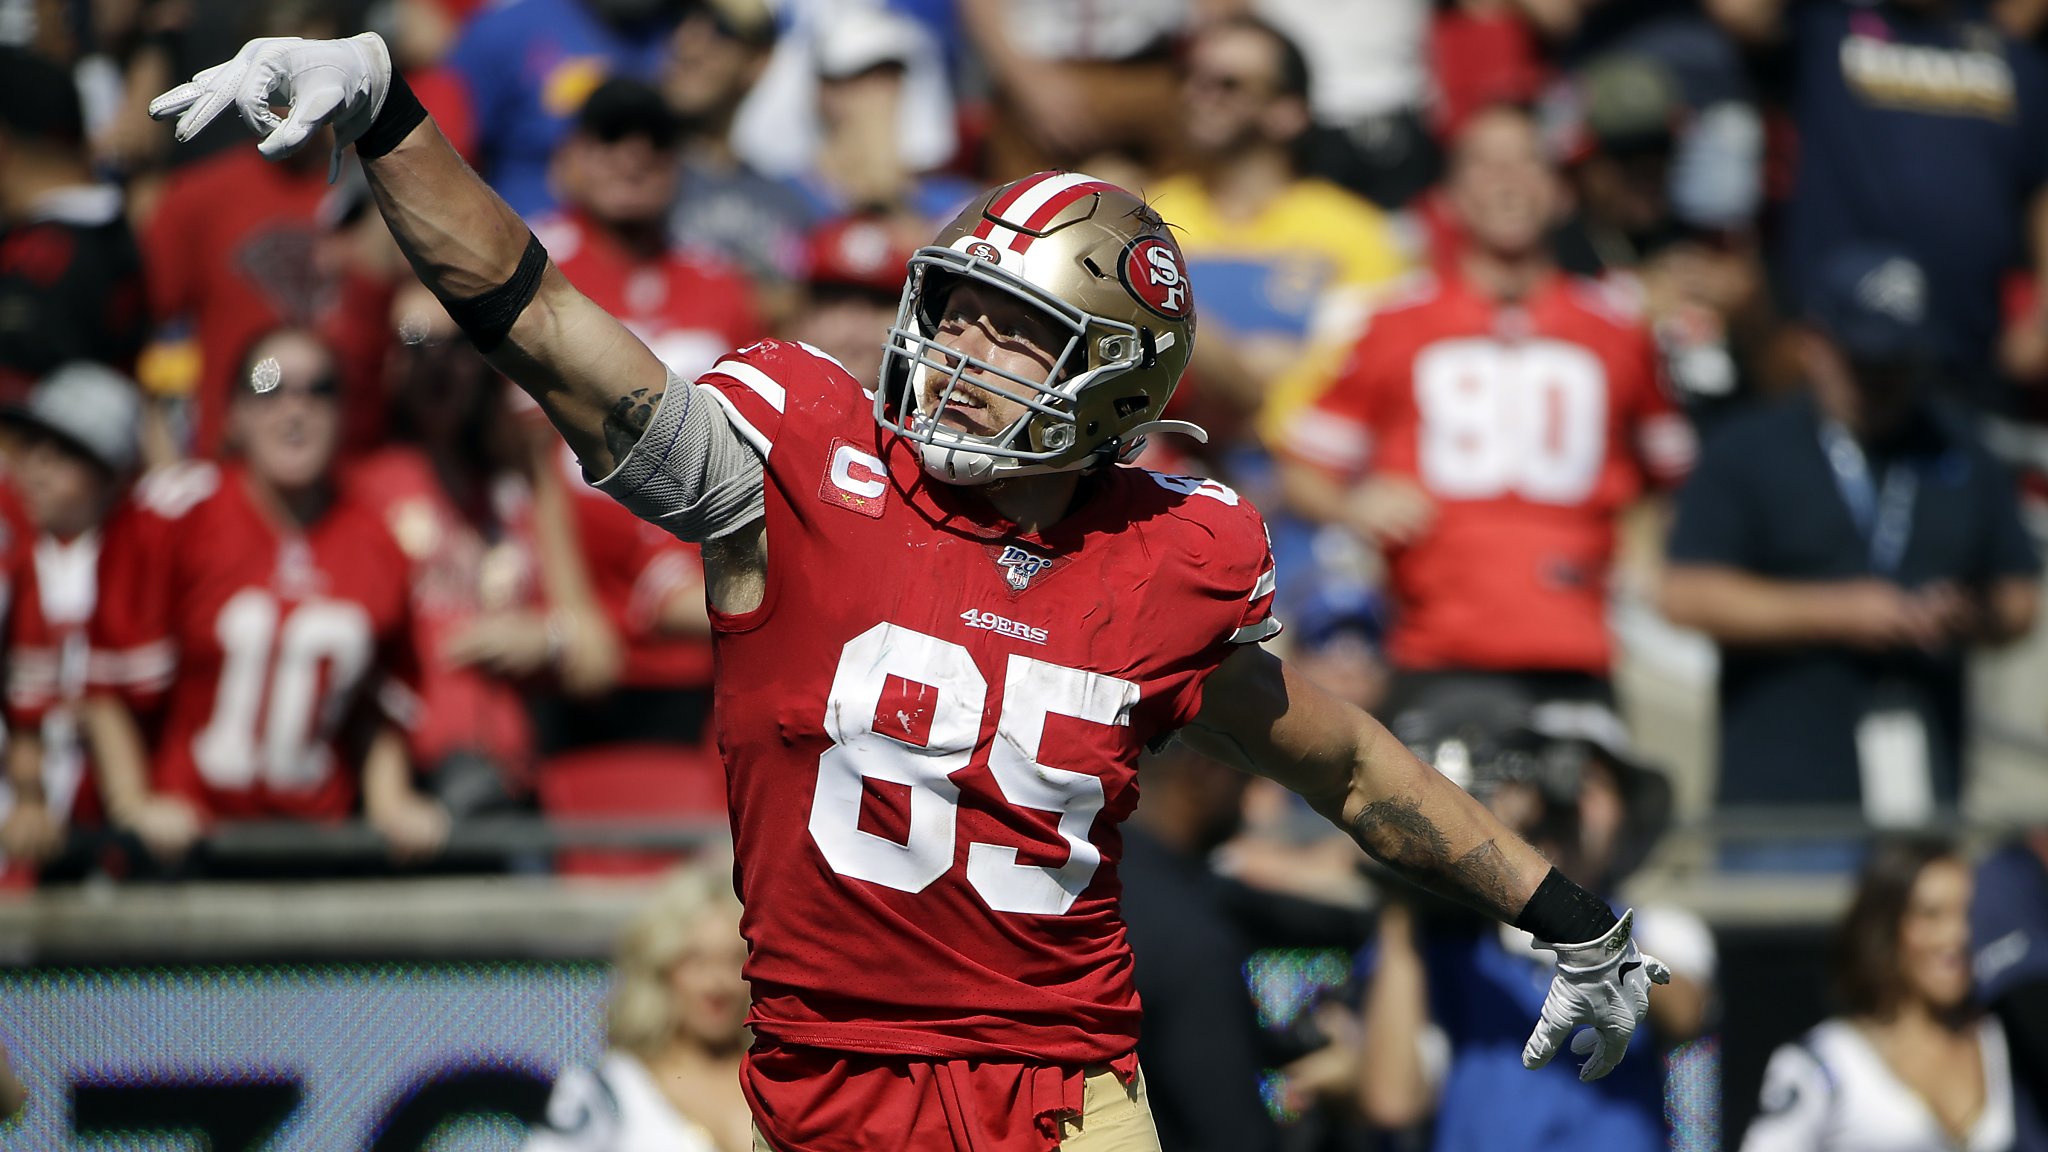 49ers' Kittle will play in Super Bowl in honor of fallen soldier